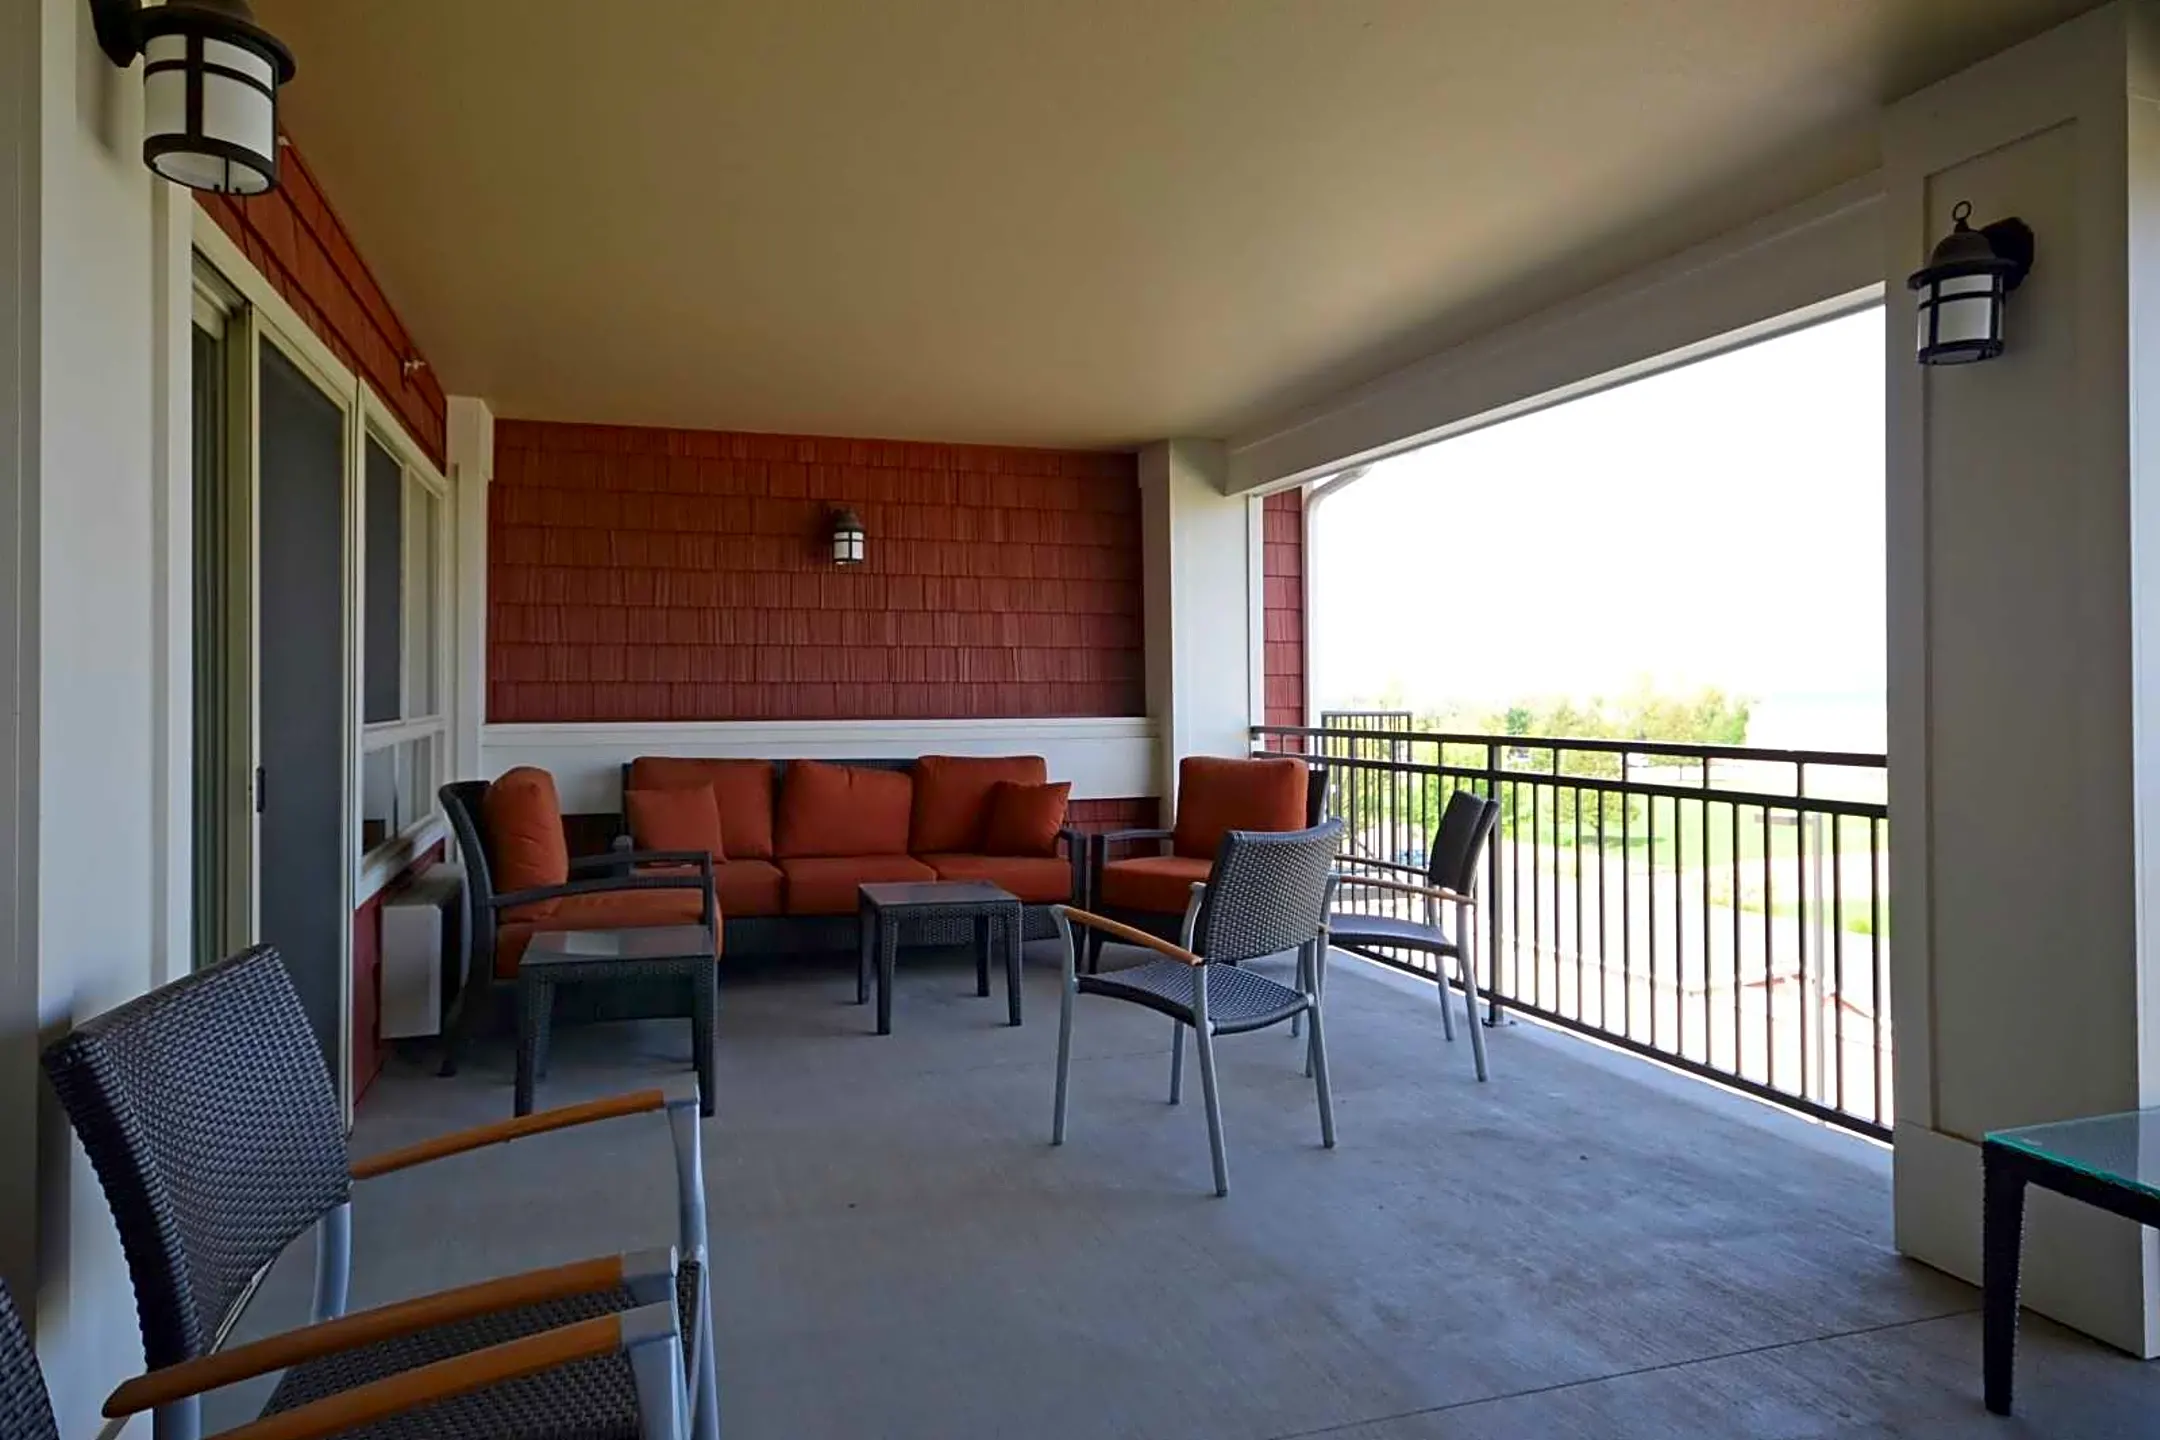 Patio / Deck - Affinity at Boise 55+ Living - Boise, ID